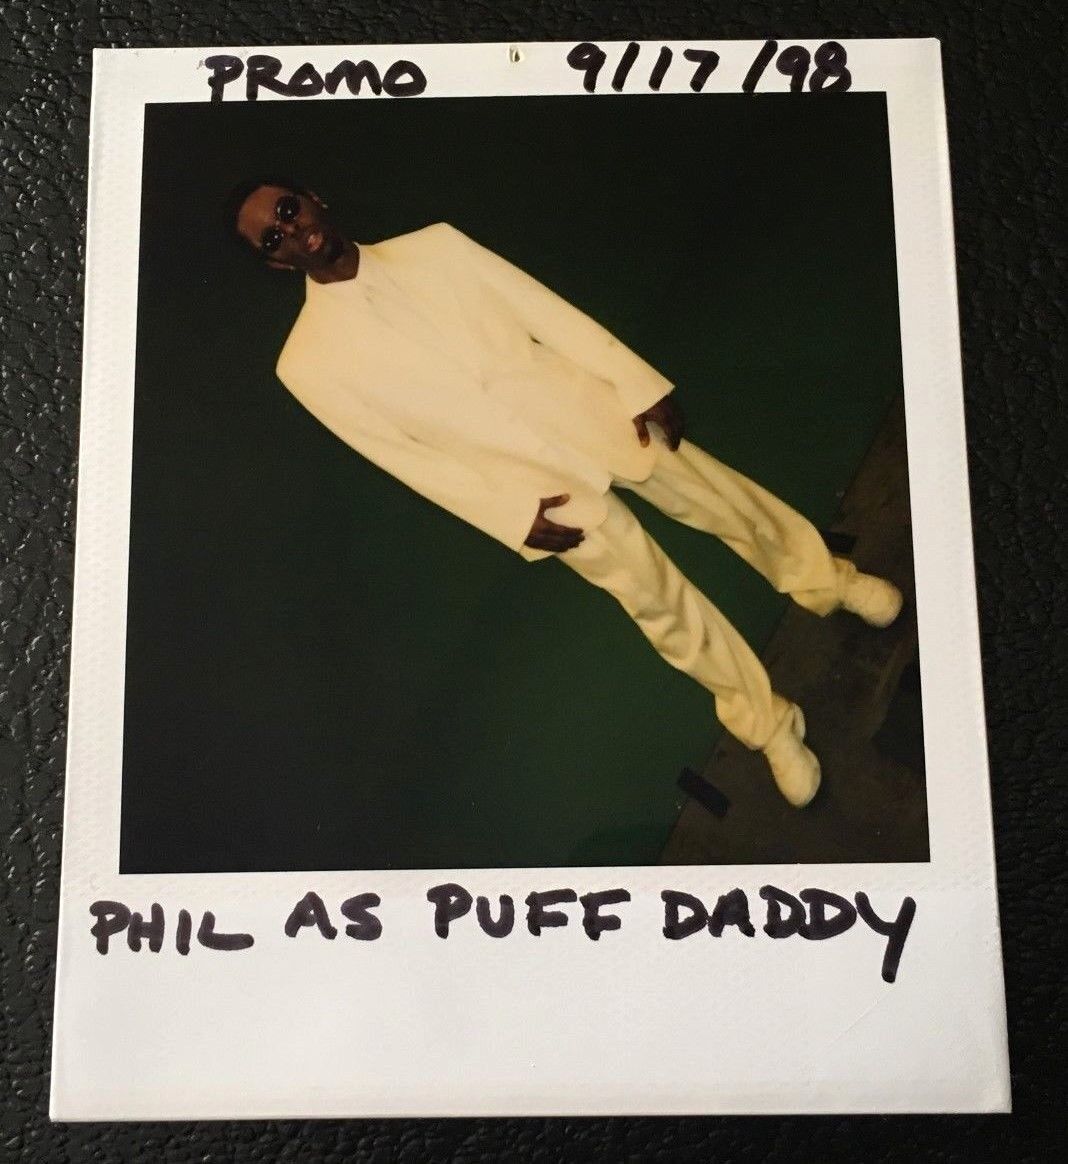 Madtv Continuity Polaroid Wardrobe Photo Phil Lamarr As Puff Daddy 1998 P Diddy